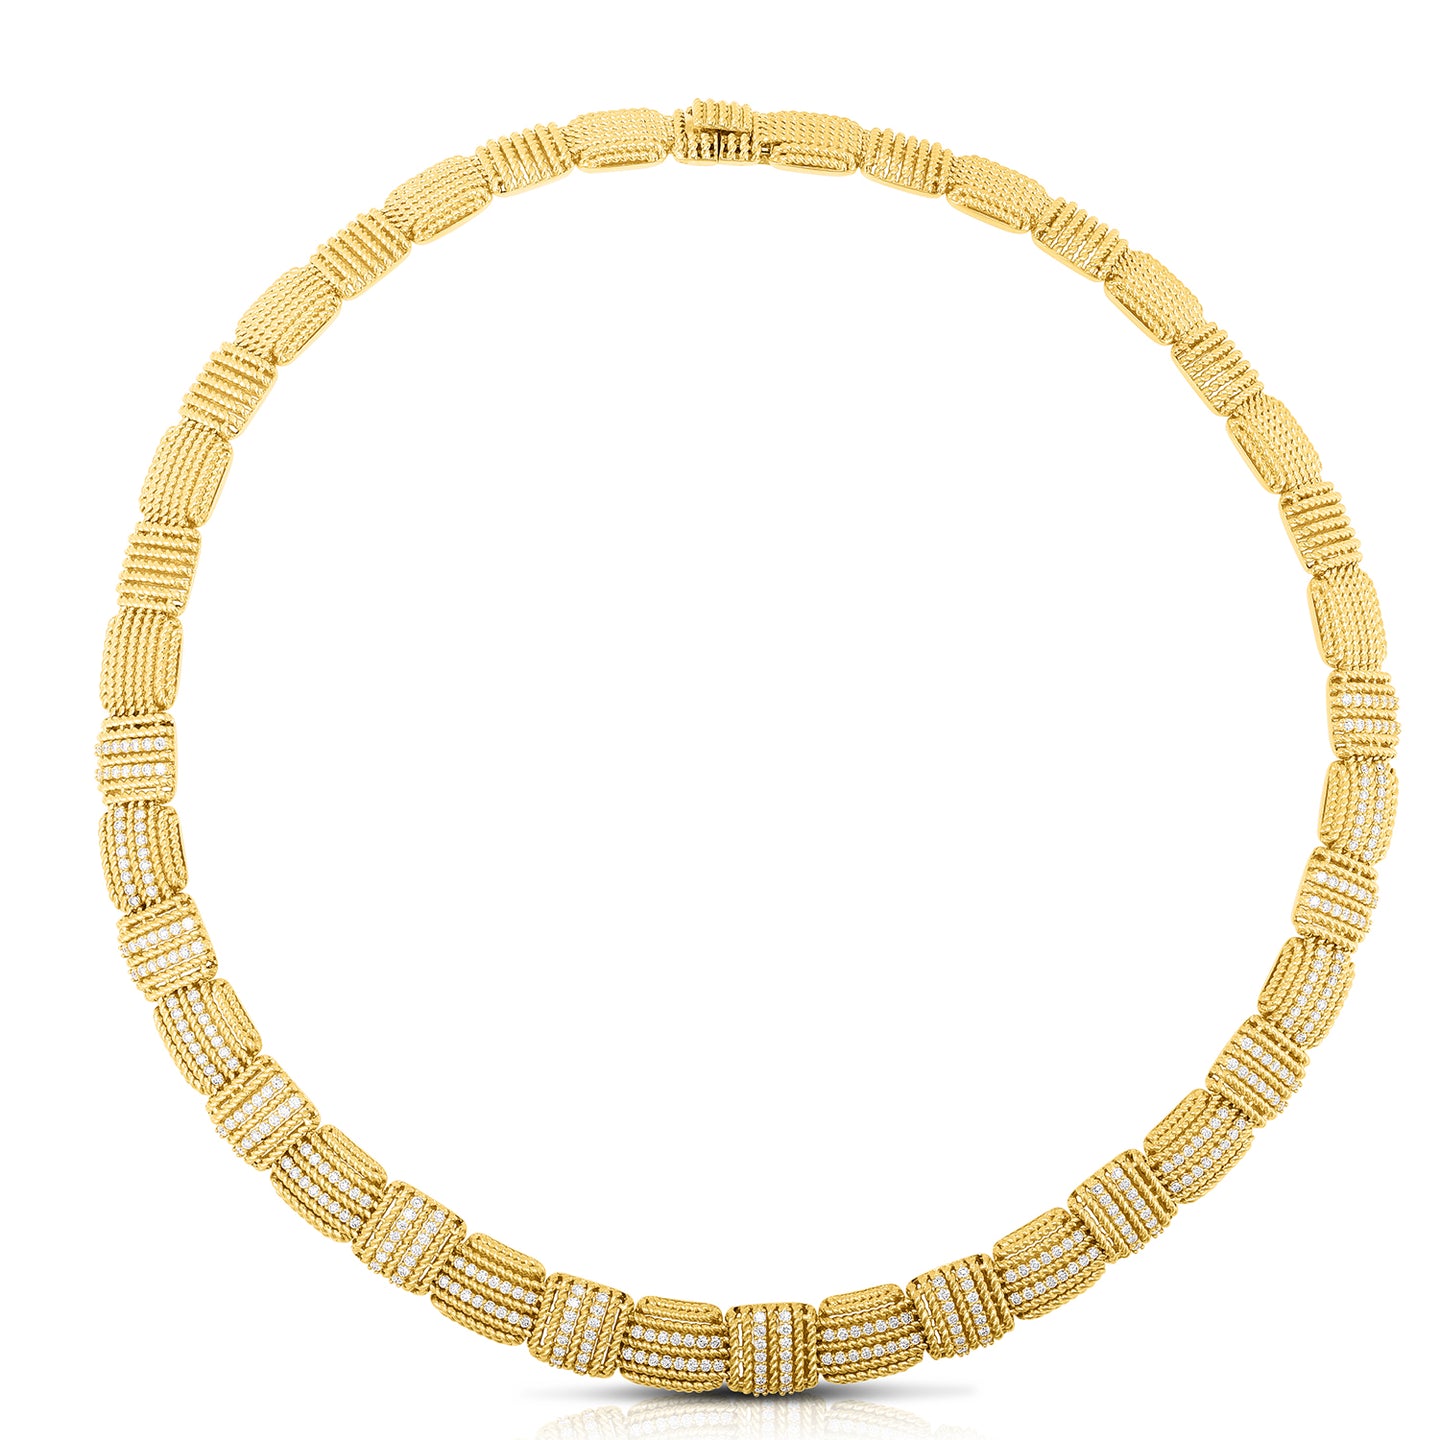 Roberto Coin Opera 18K Gold Collar Necklace with Diamond Accents in Yellow Gold